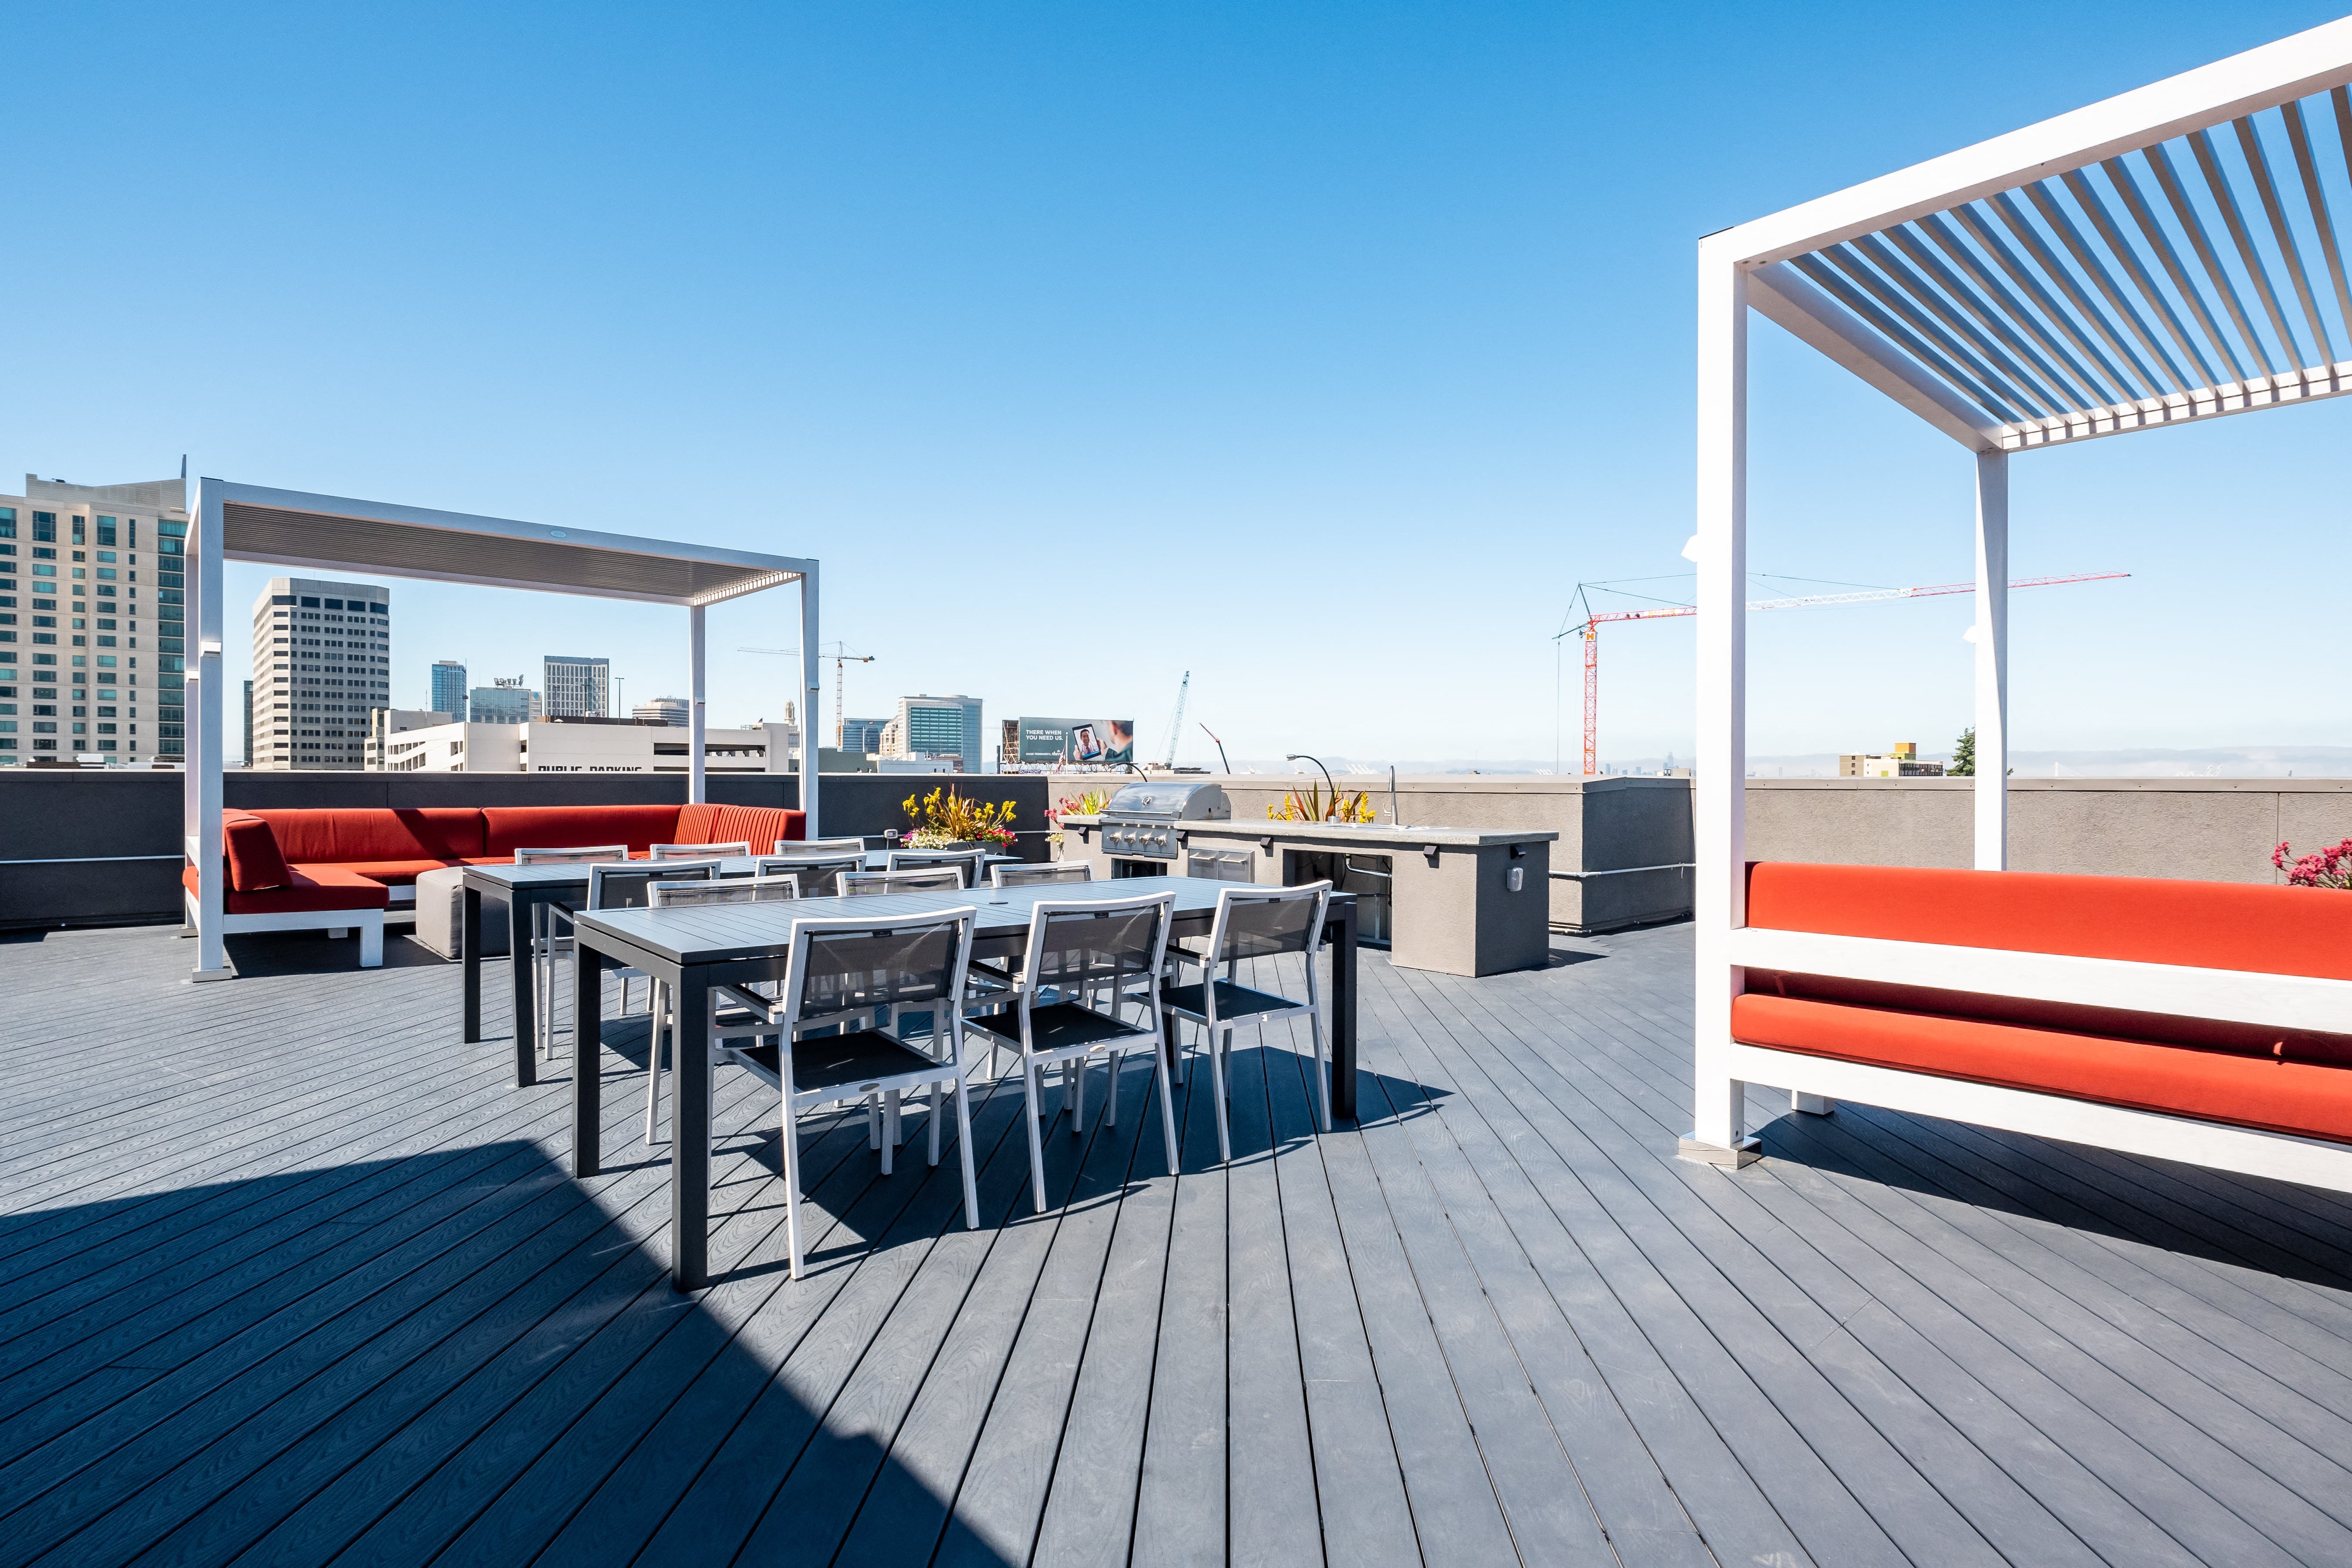 Upland Oakland, CA Apartments for Rent - Rowhaus Apartments Exterior Rooftop with Spectacular Views and Lounge Chairs